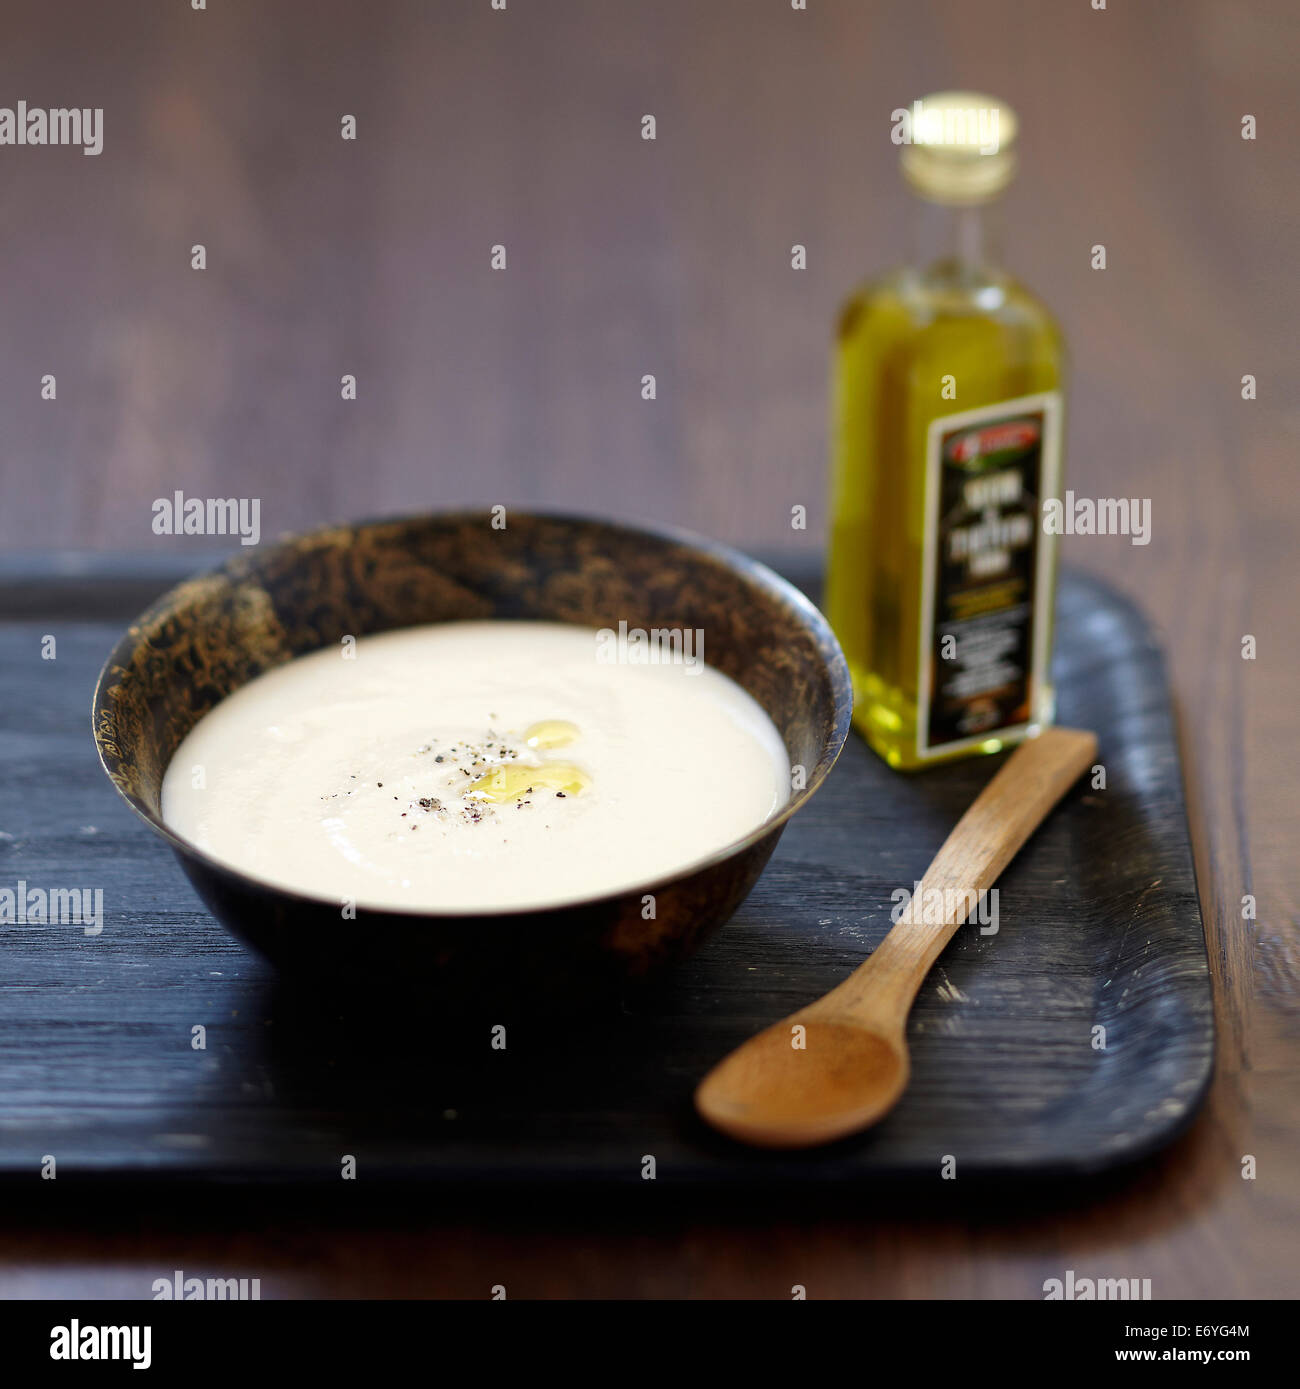 Cream of Coco beans from Paimpol with truffle oil Stock Photo